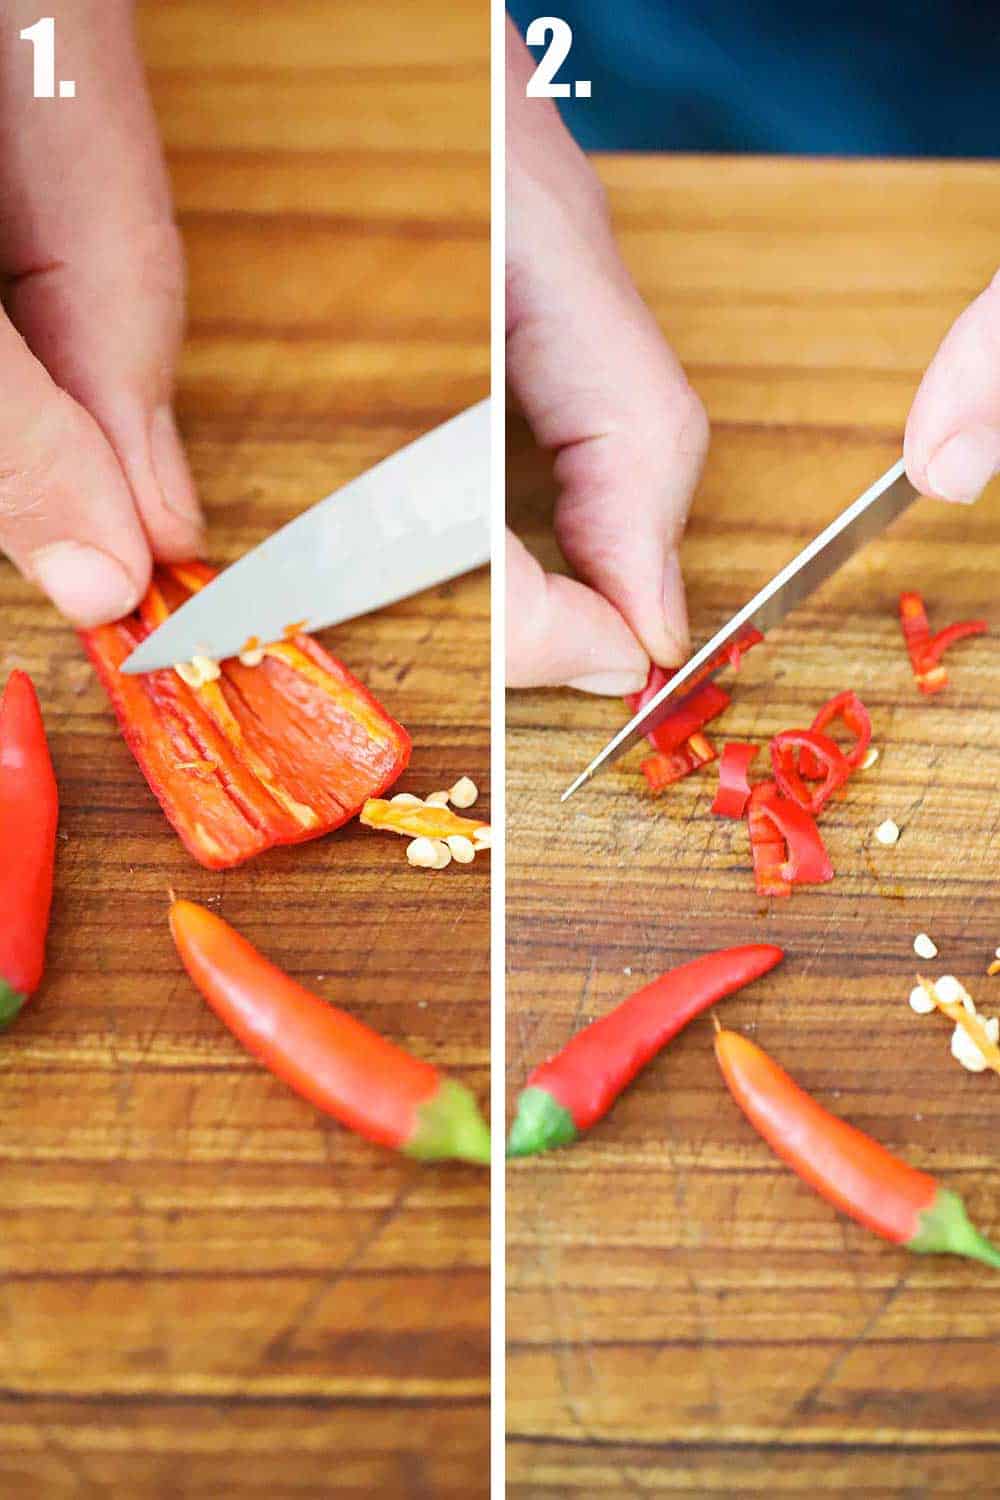 Two hands holding a knife removing seeds from a red Thai pepper.